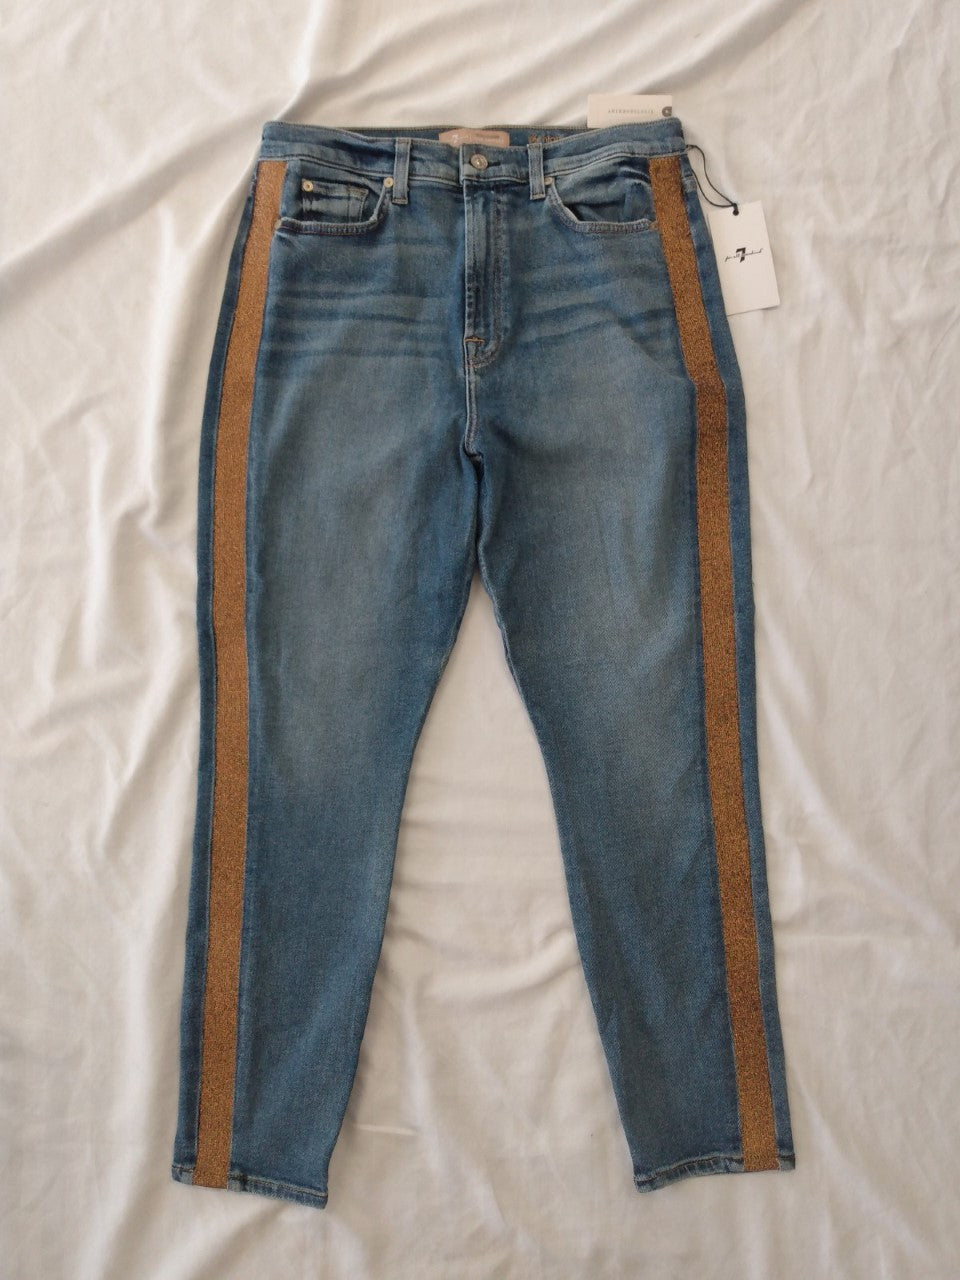 NWT - 7 For All Mankind "Luke Vintage" Jeans - 31